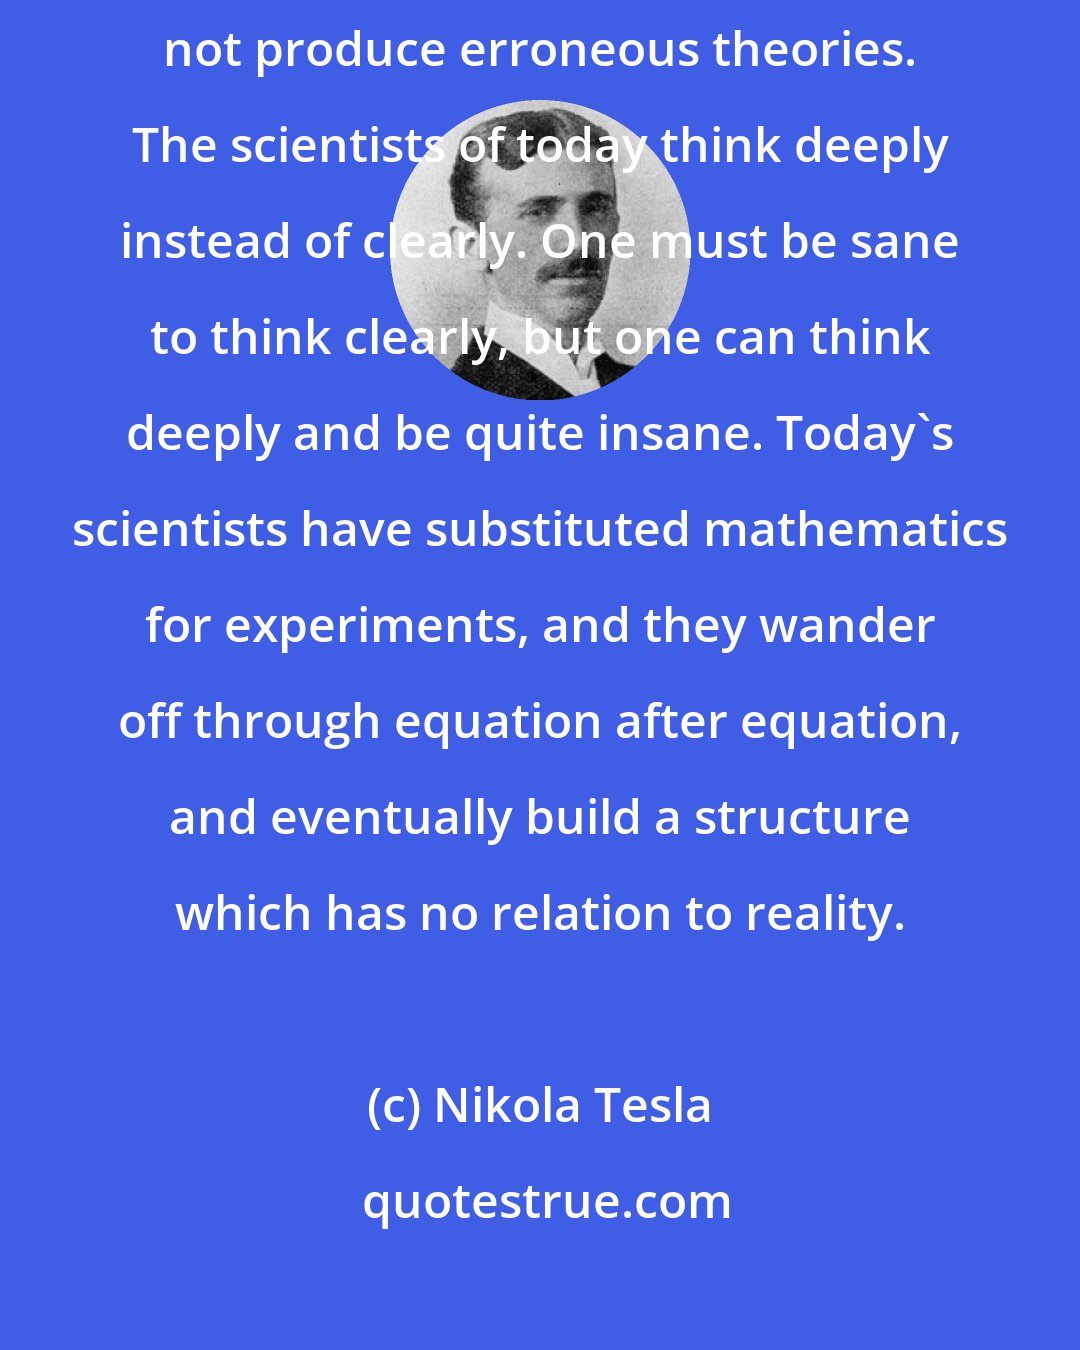 Nikola Tesla: The scientists from Franklin to Morse were clear thinkers and did not produce erroneous theories. The scientists of today think deeply instead of clearly. One must be sane to think clearly, but one can think deeply and be quite insane. Today's scientists have substituted mathematics for experiments, and they wander off through equation after equation, and eventually build a structure which has no relation to reality.